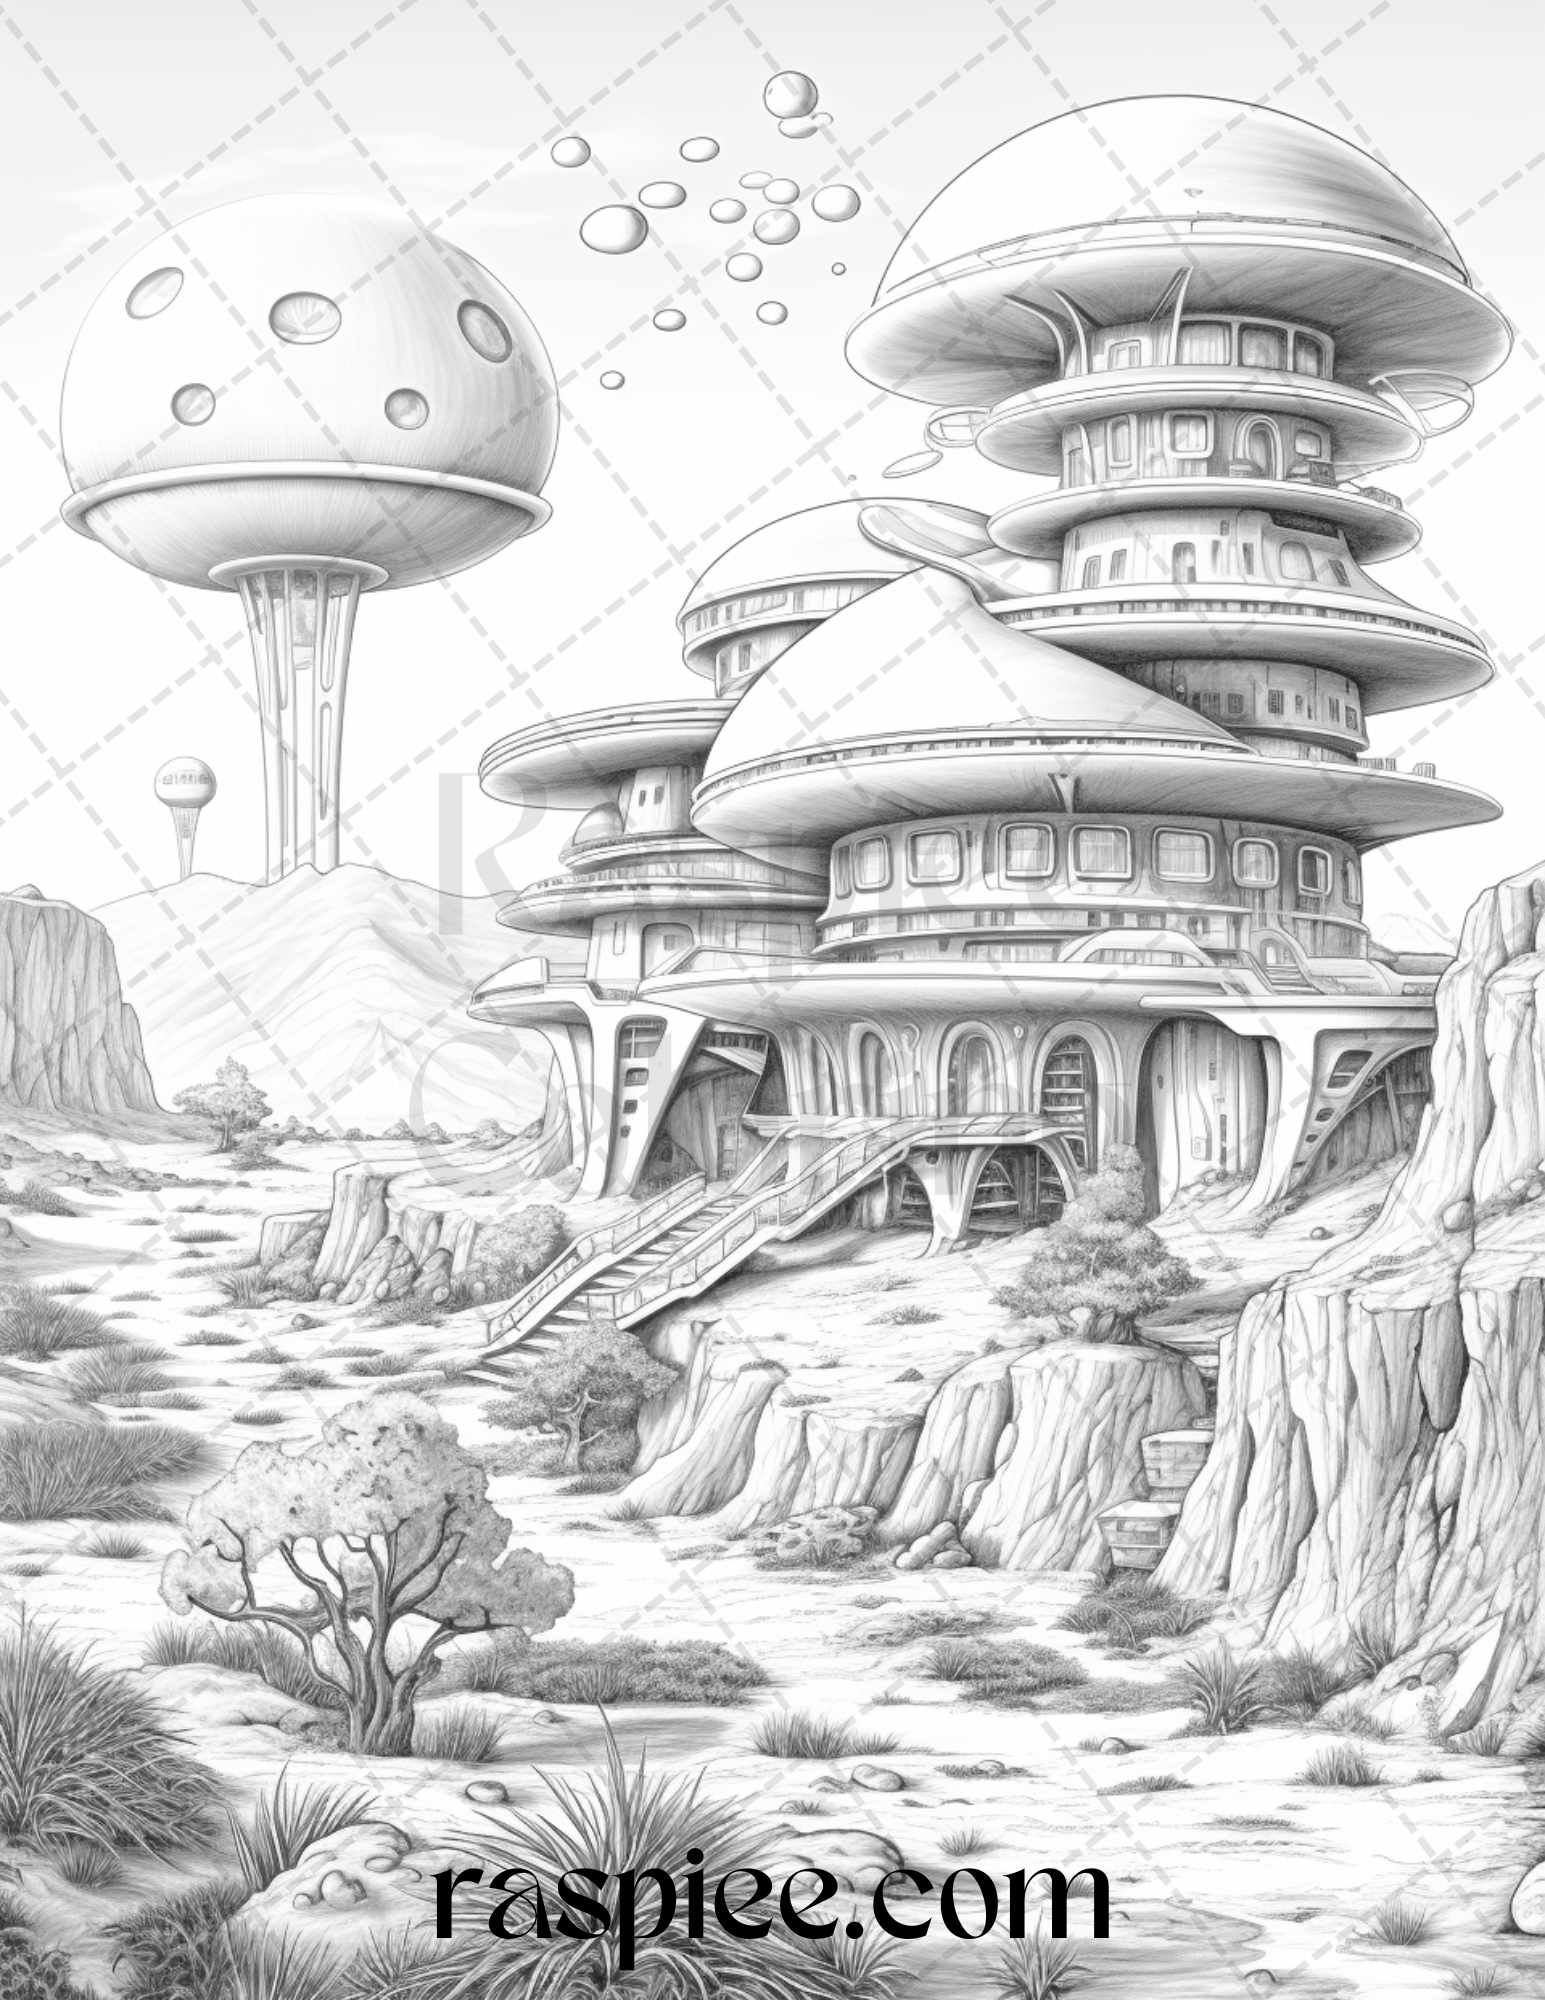 Alien Houses Grayscale Coloring Pages, Printable Outer Space Relaxation Art, Celestial Adult Coloring Illustrations, Creative Alien Homes Printable Art, Unique Space-Themed Grayscale Designs